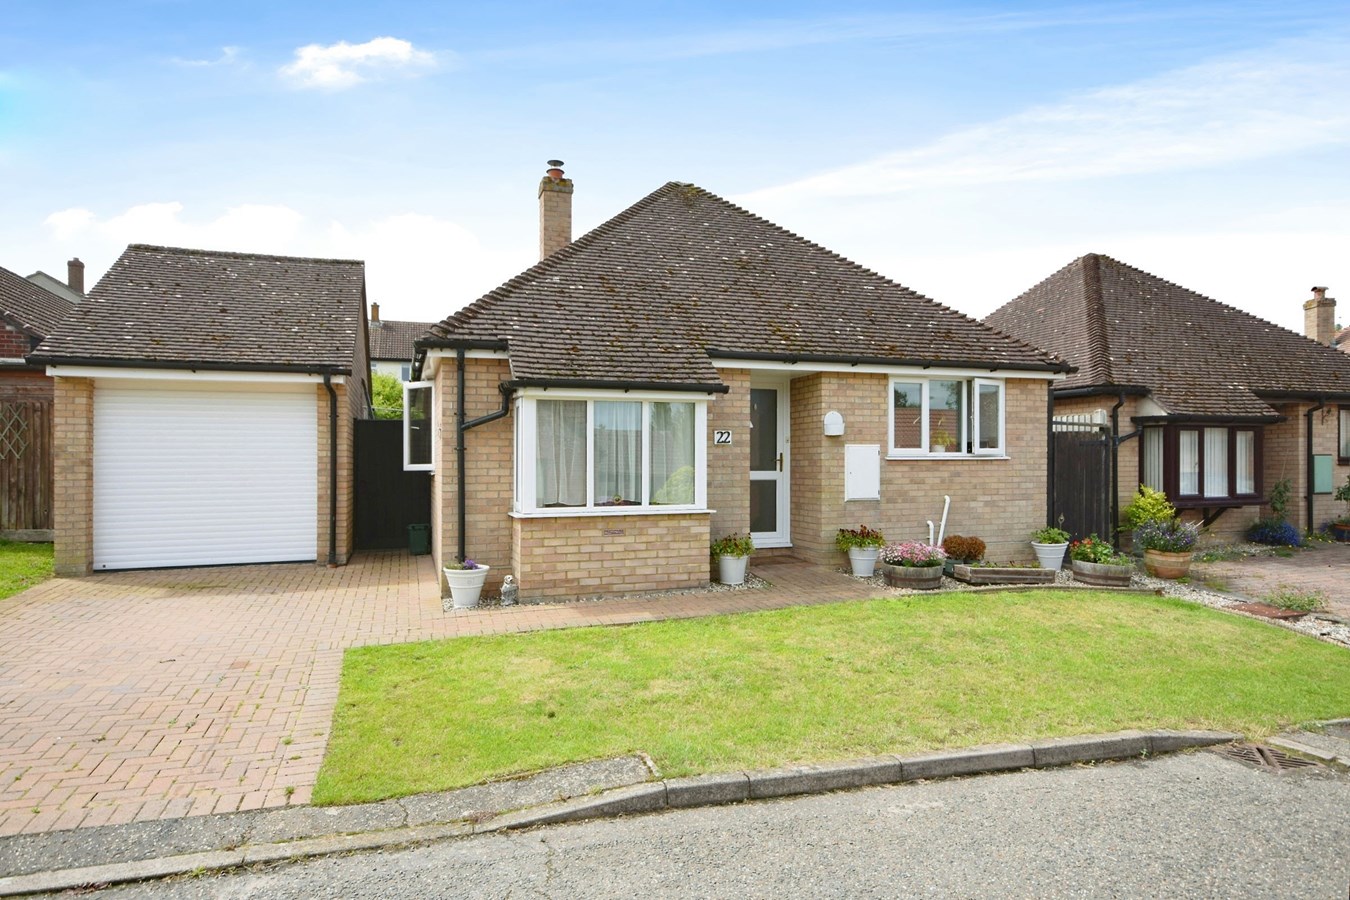 Homefield Way, Earls Colne, Colchester, CO6